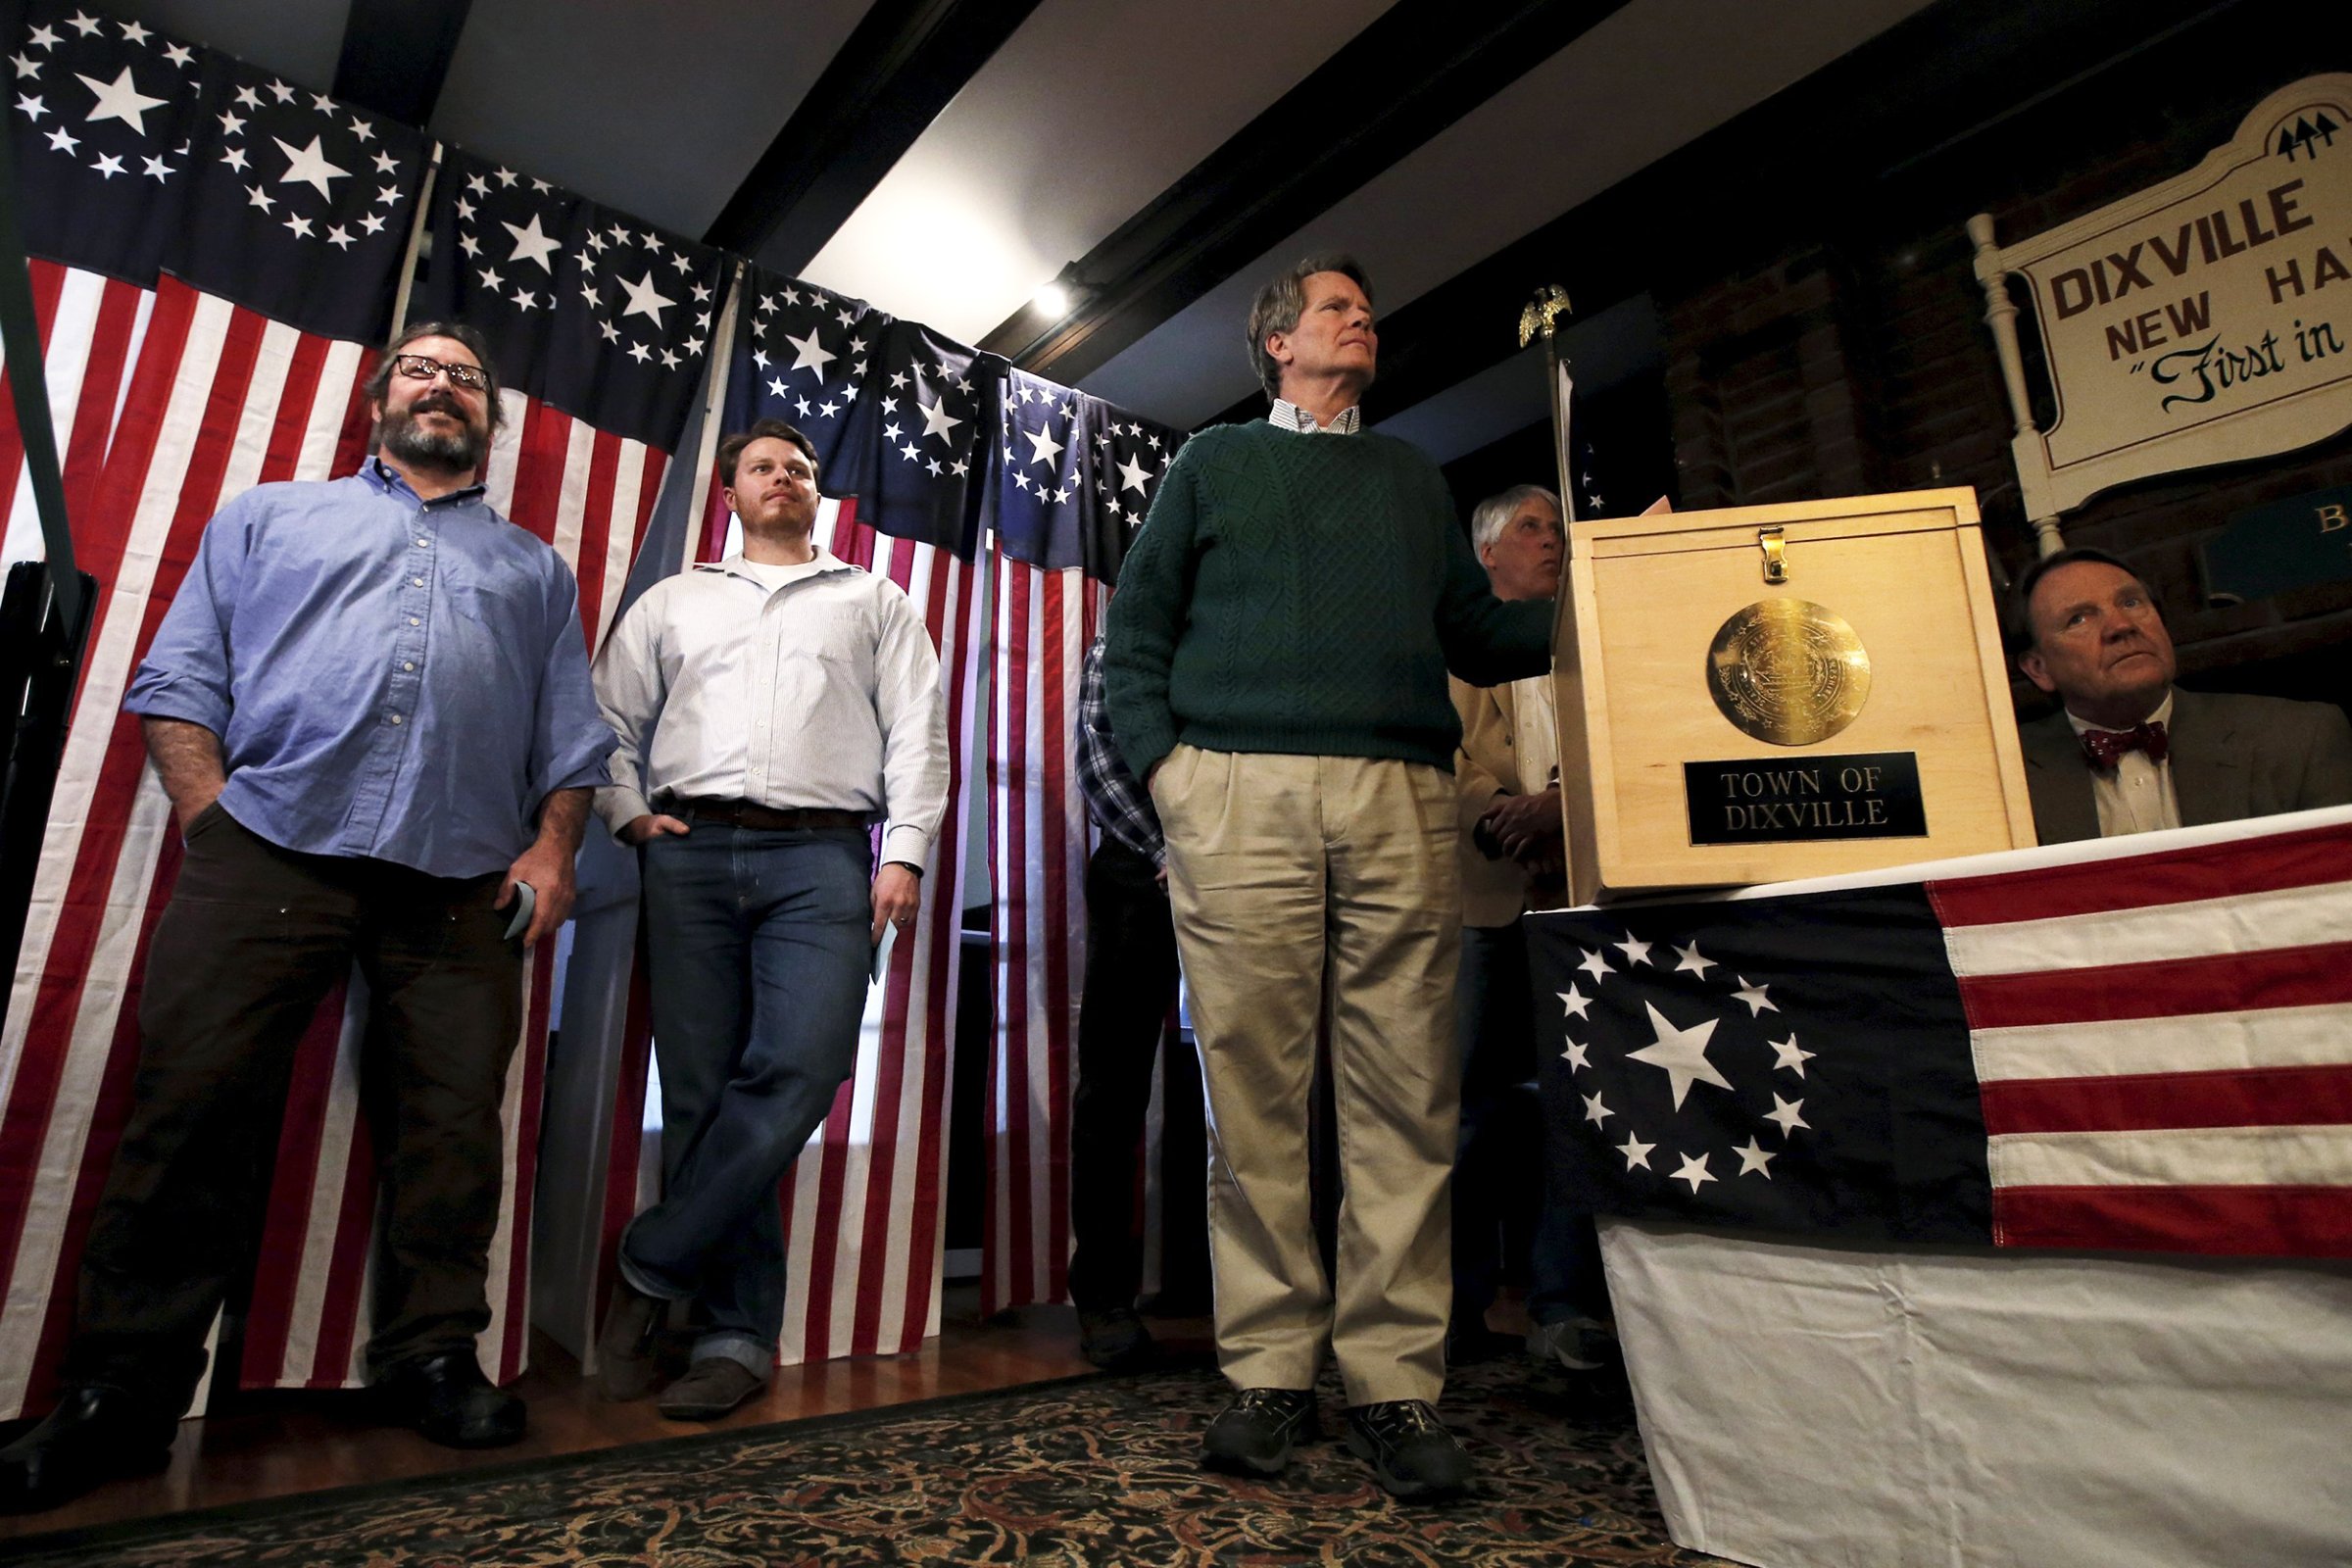 Jeff Stevens and other voters wait for the last few seconds to midnight to cast their votes in the U.S. Presidential primary election at the Hale House at Balsams Hotel in Dixville Notch, NH on Feb. 8, 2016.